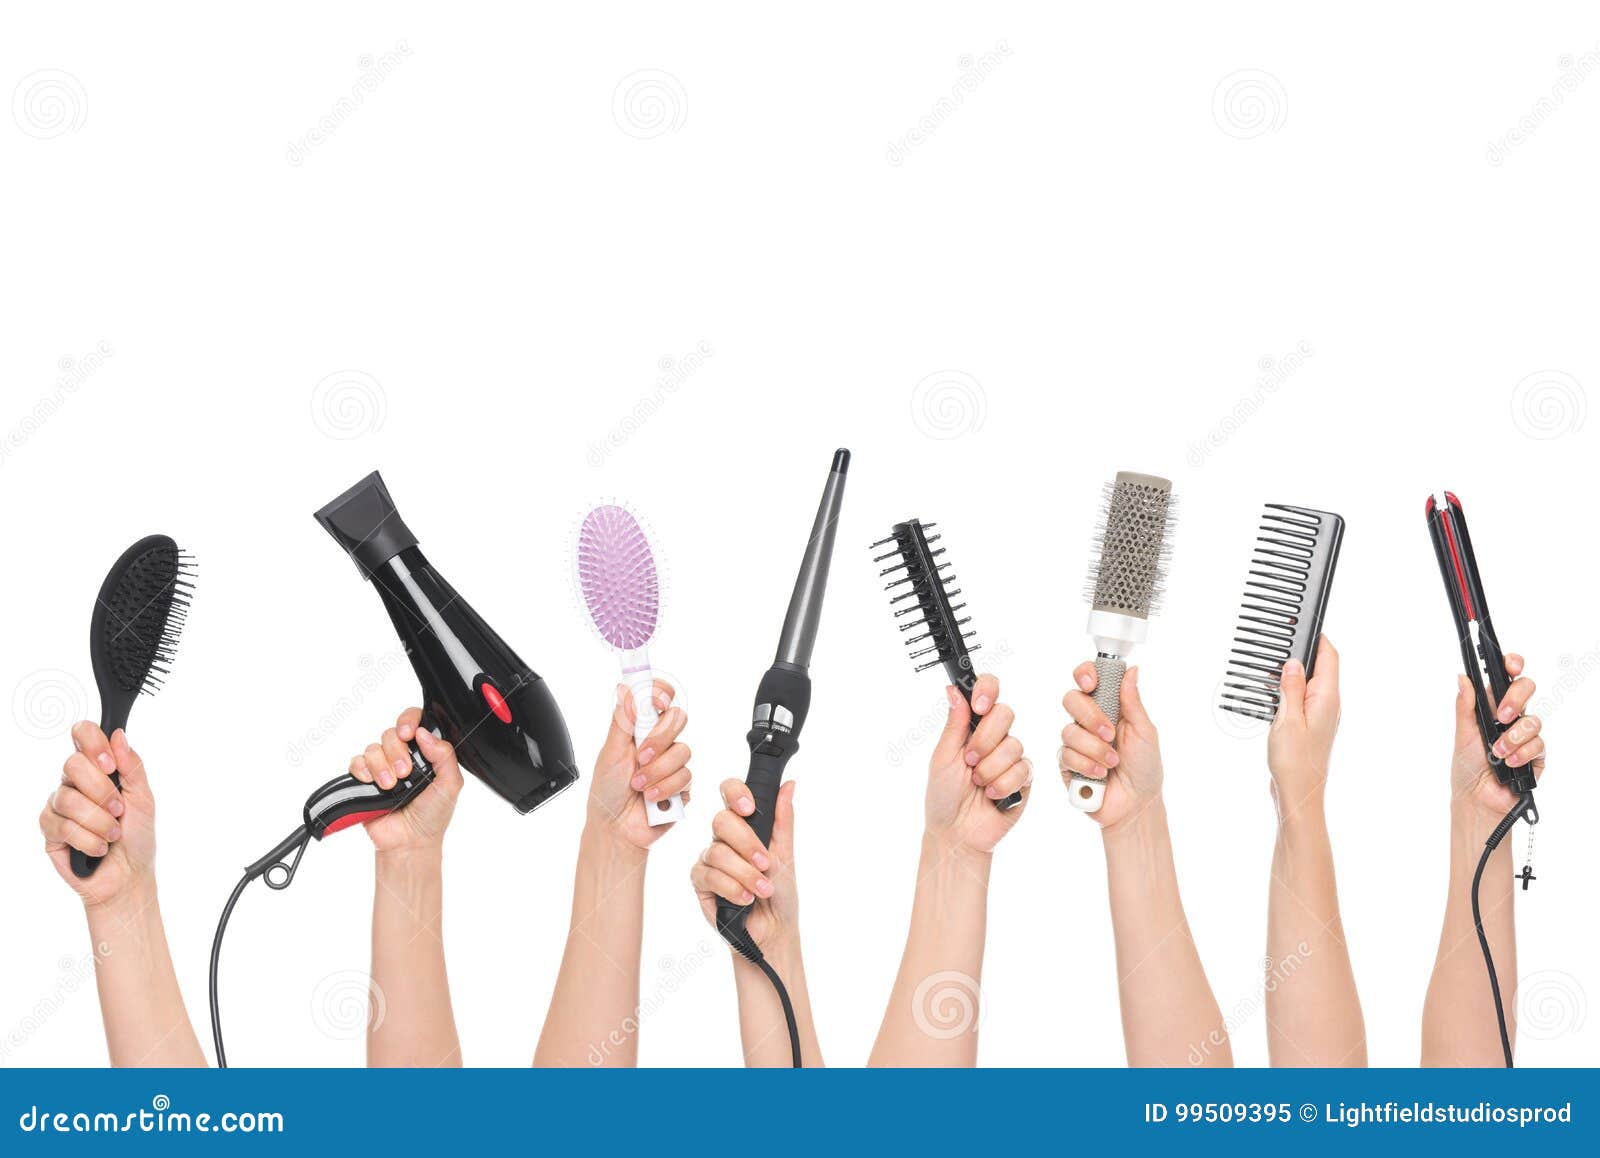 hands holding hairdressing tools